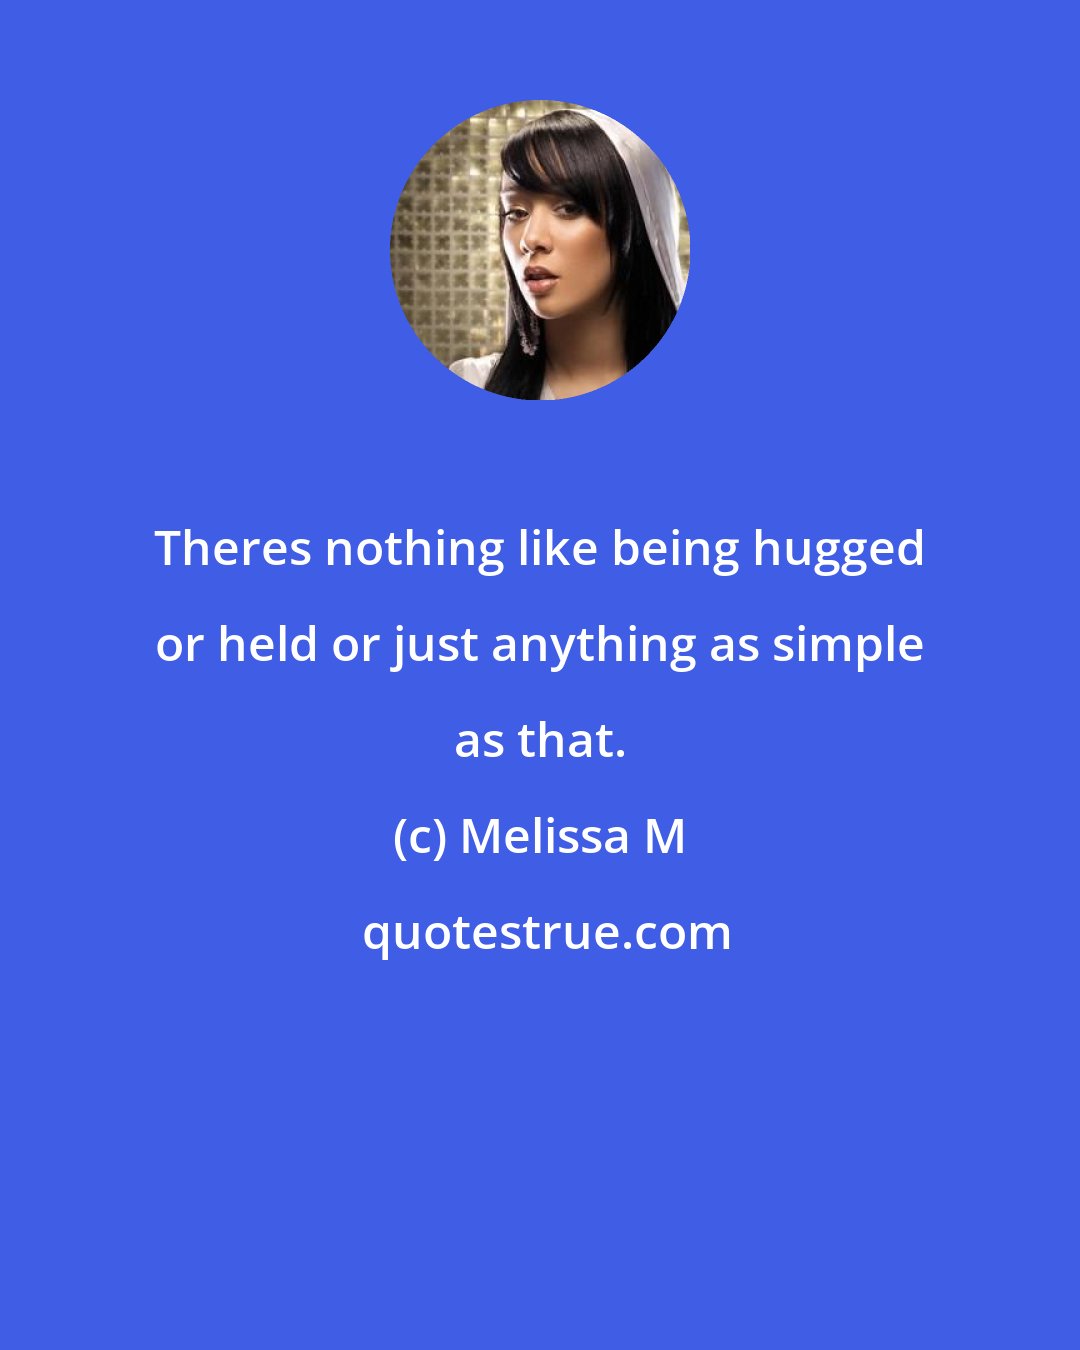 Melissa M: Theres nothing like being hugged or held or just anything as simple as that.